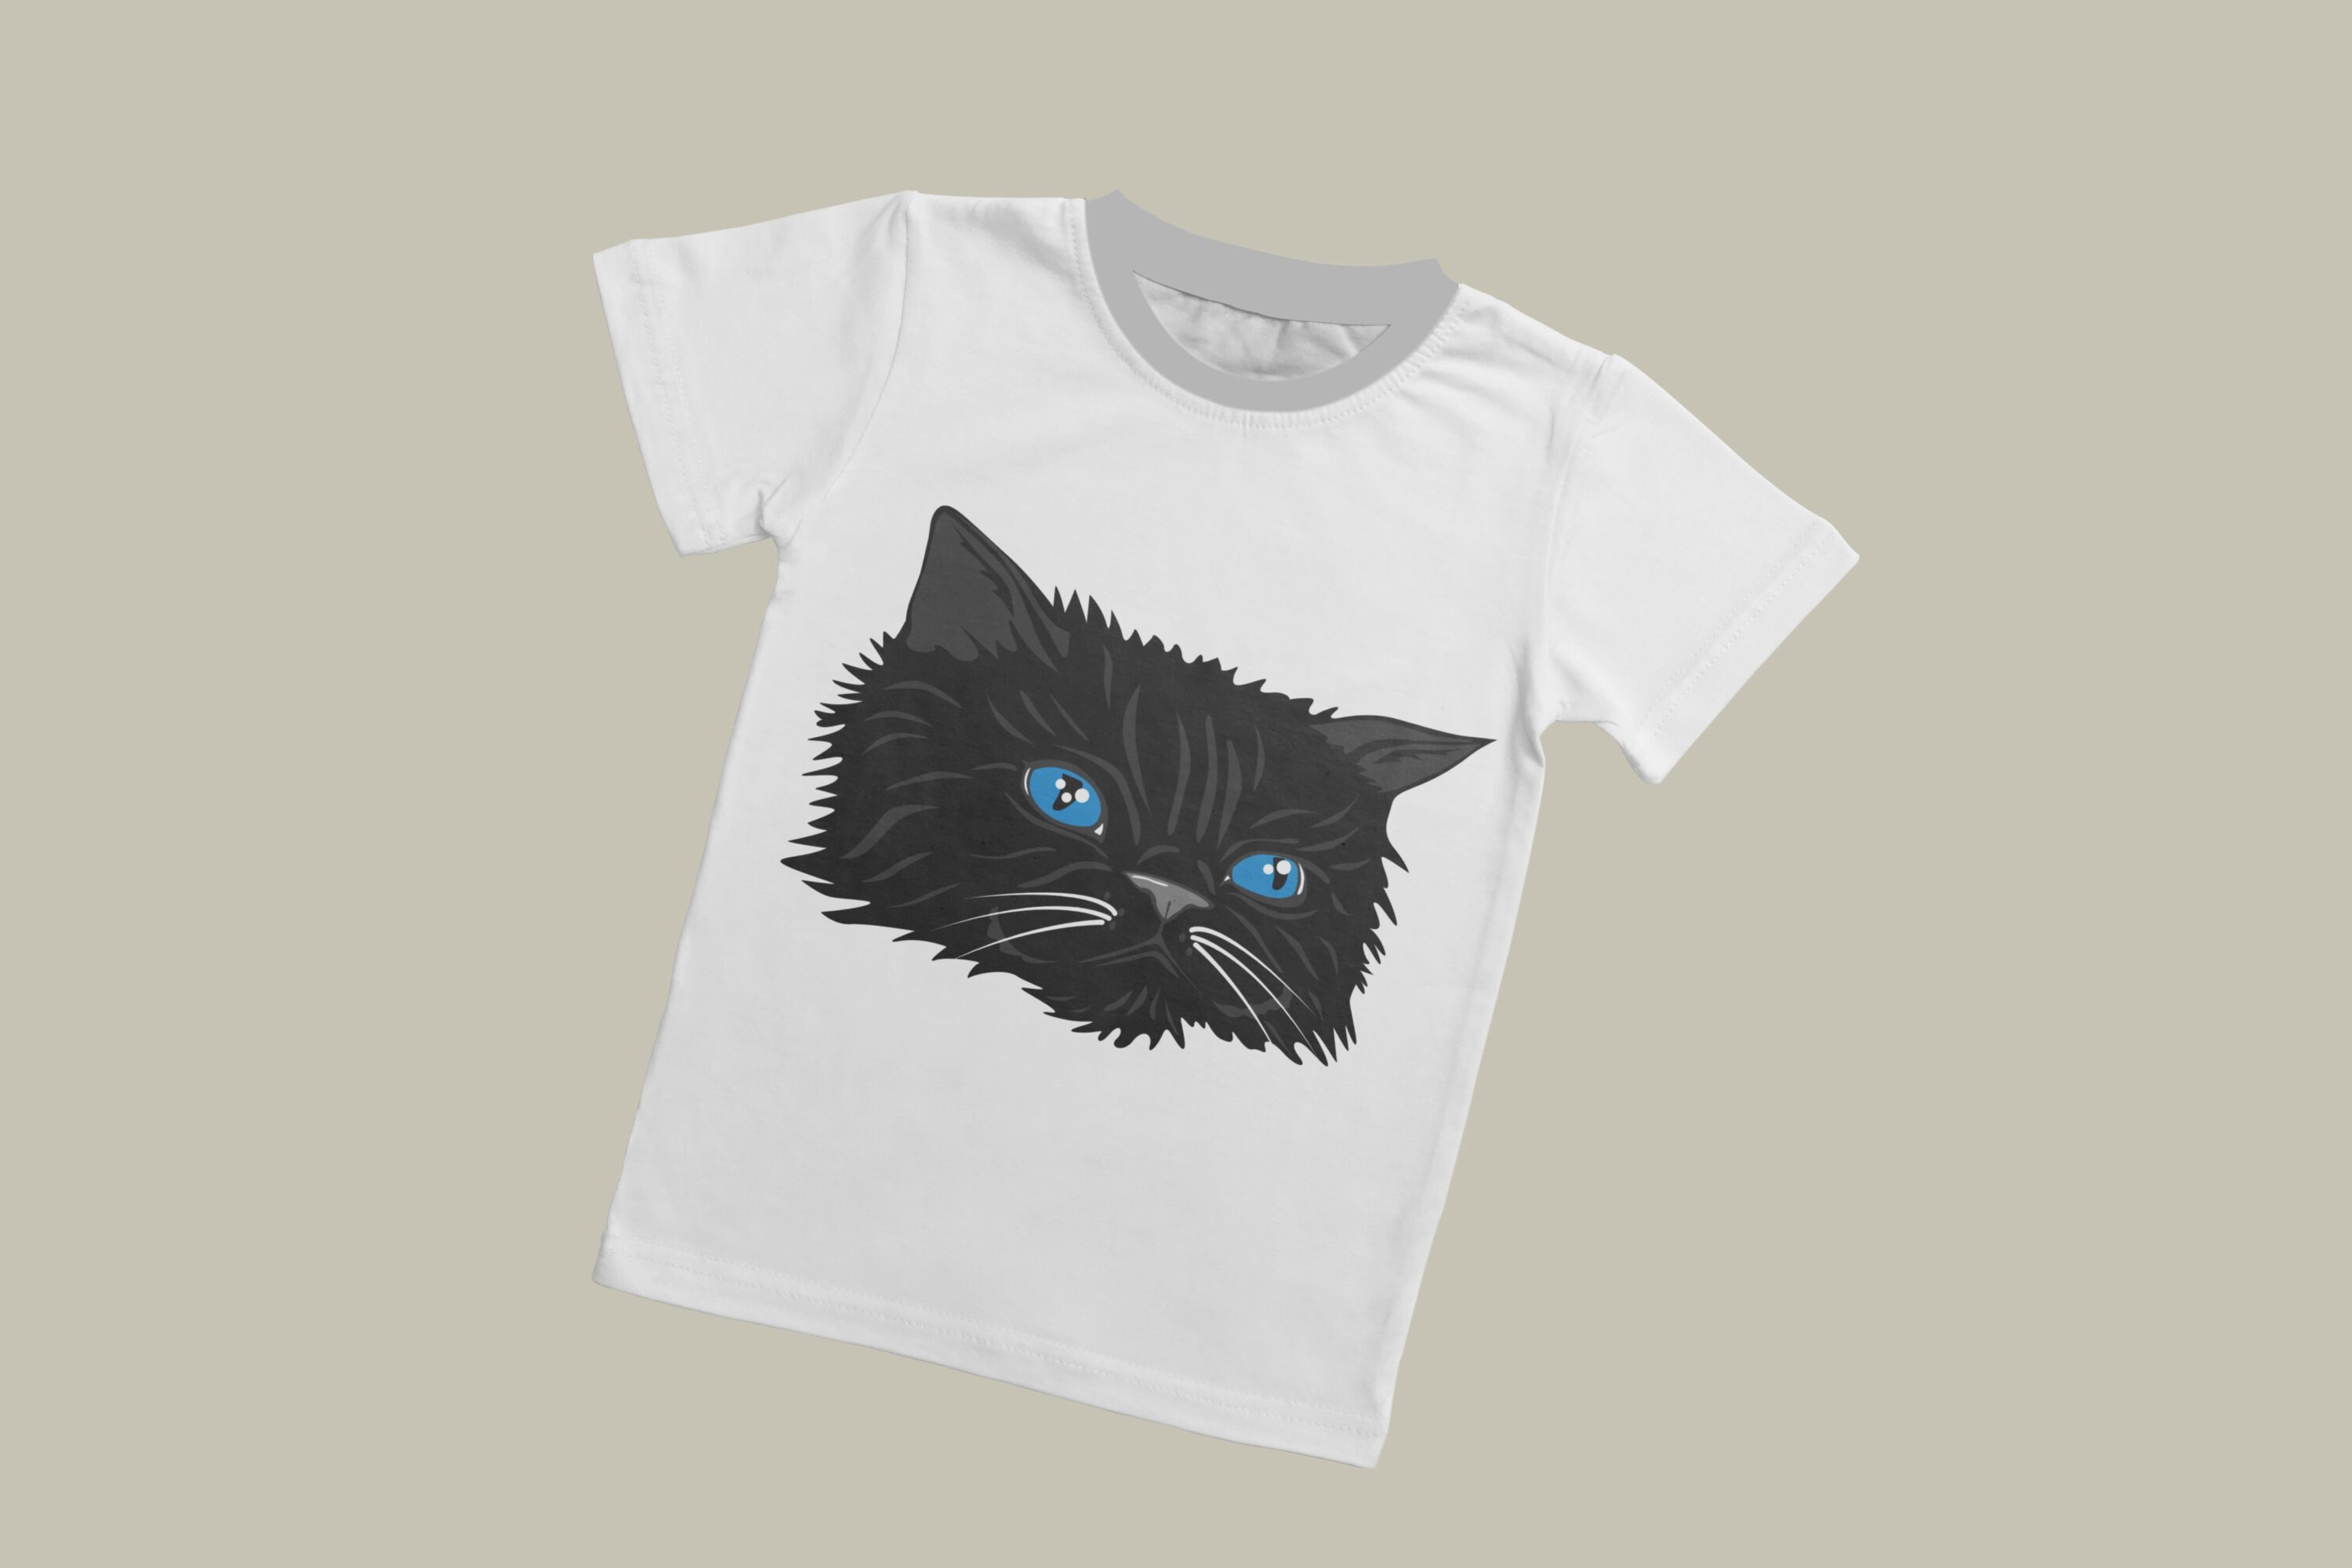 A white T-shirt with a grey collar and the face of a fluffy black cat with blue eyes on a grey background.